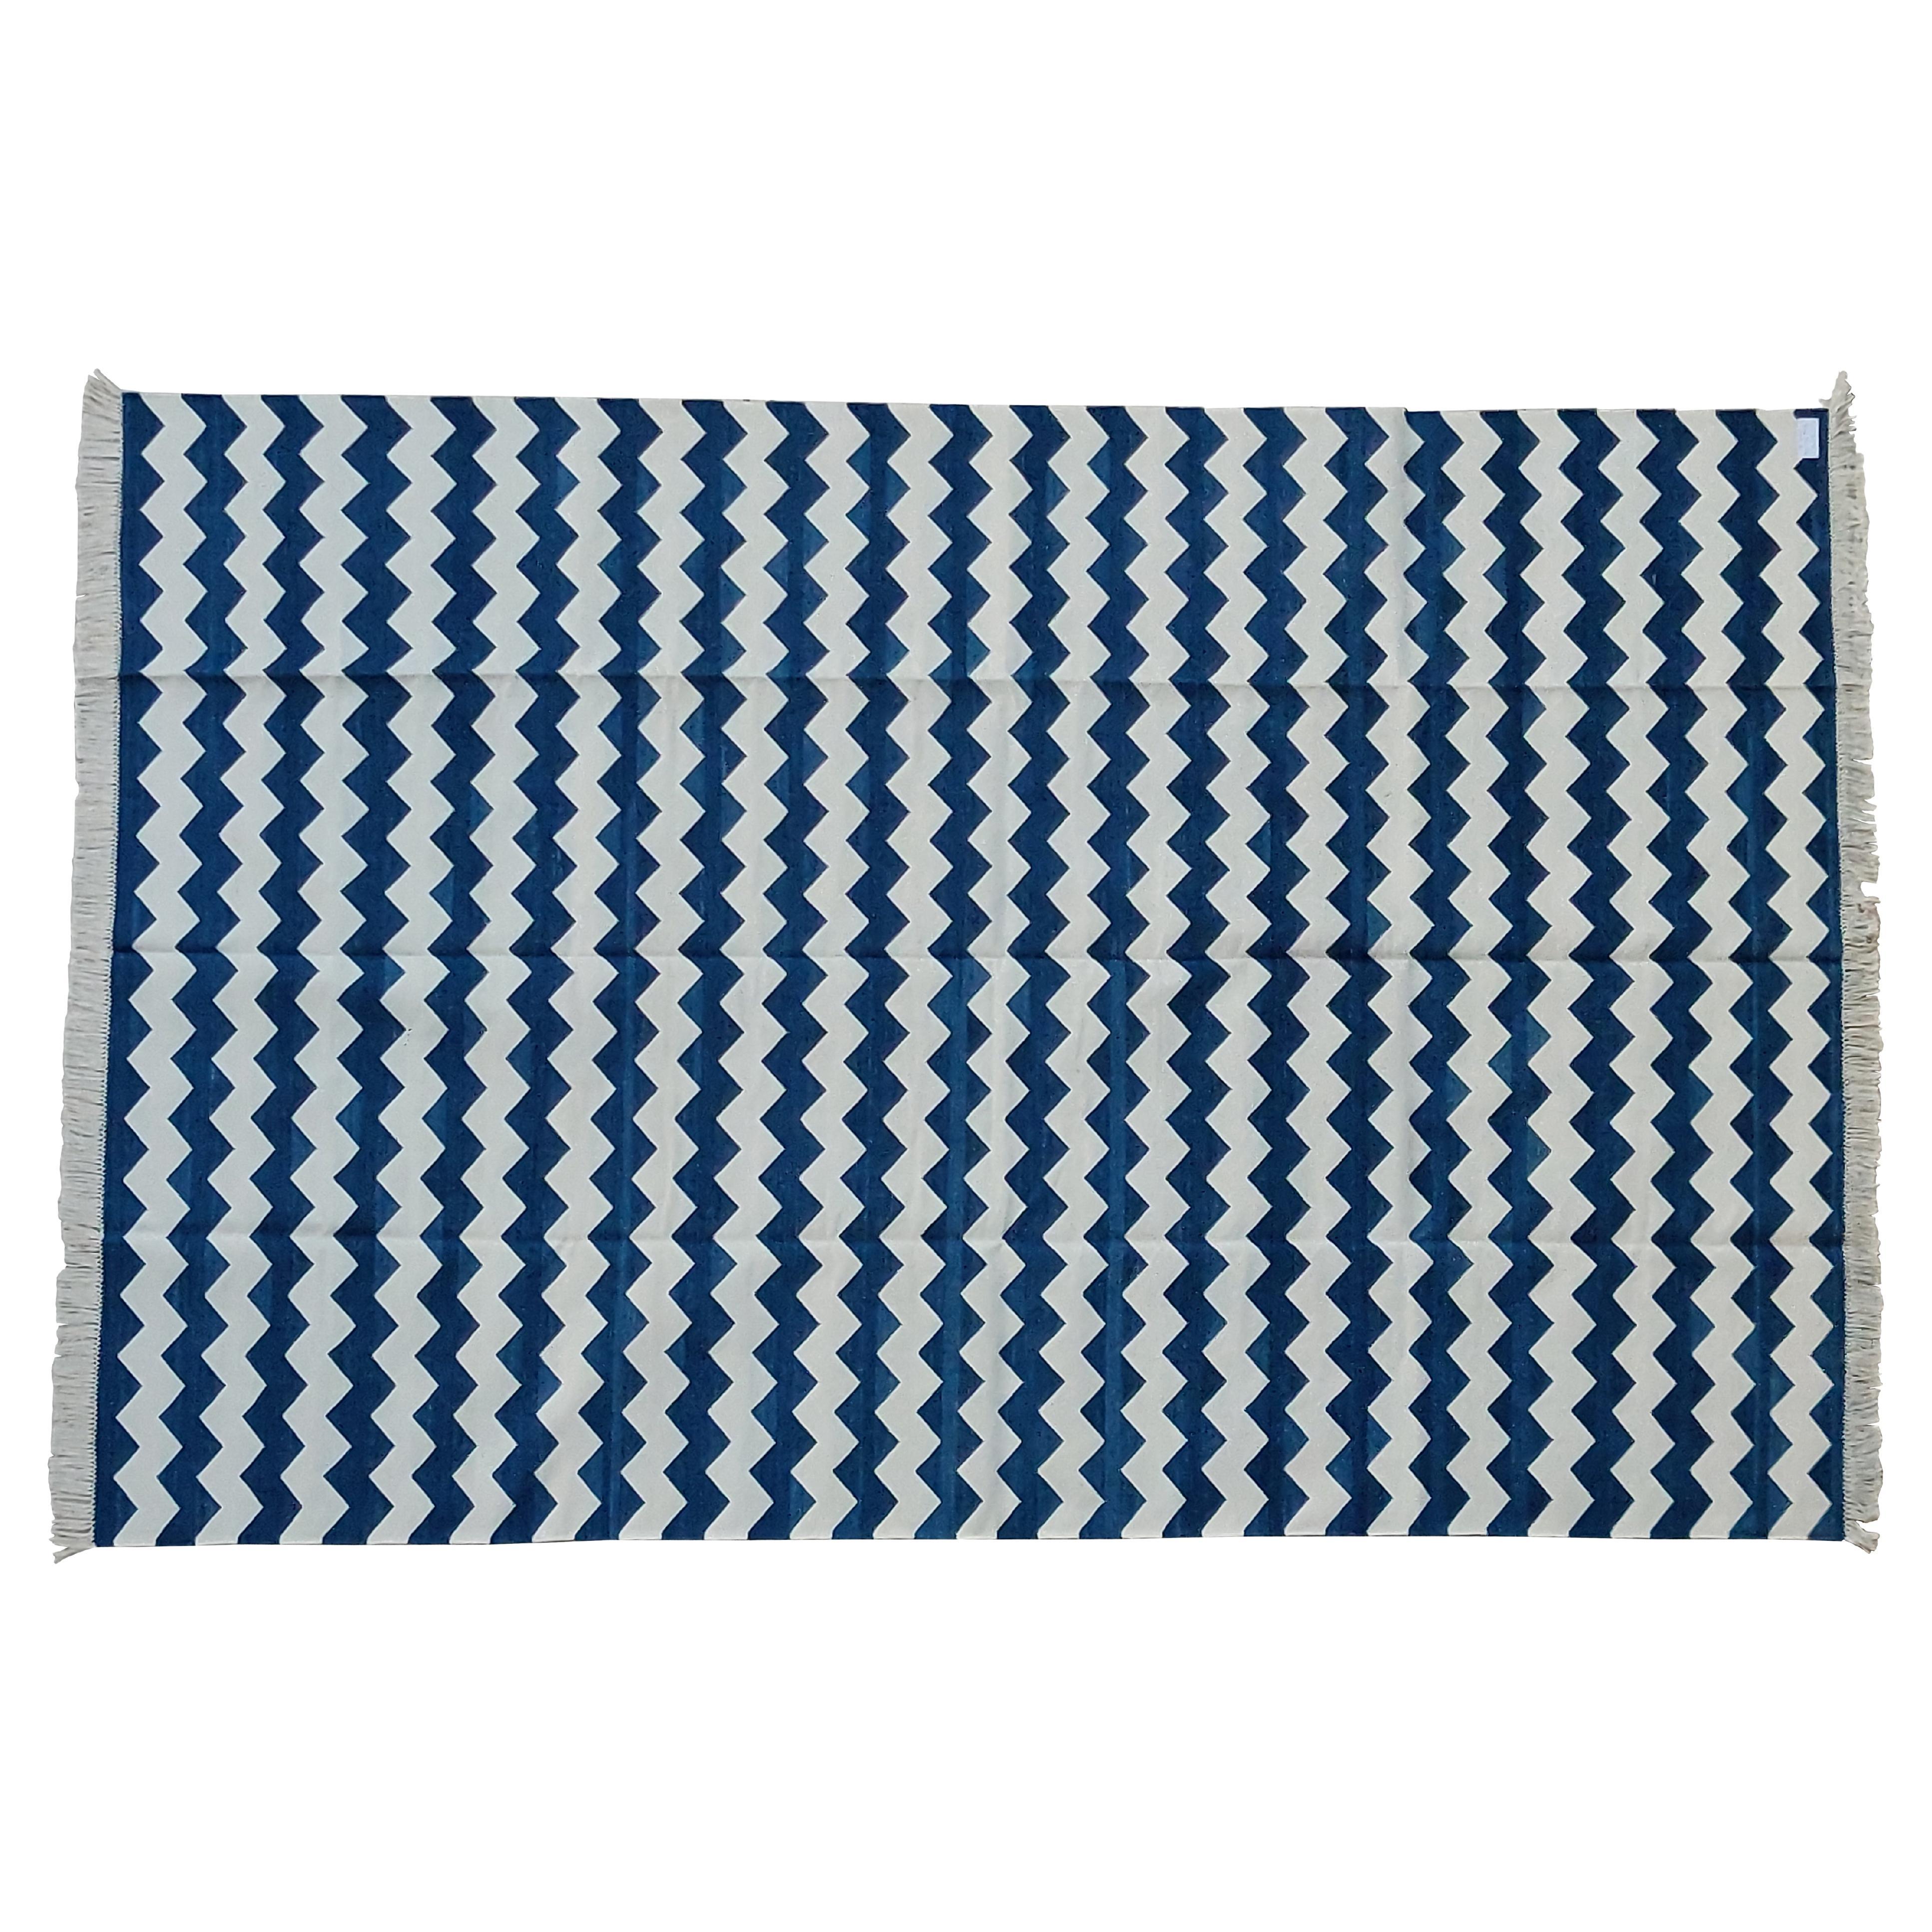 Handmade Cotton Area Flat Weave Rug, 6x9 Blue And White Zig Zag Striped Dhurrie